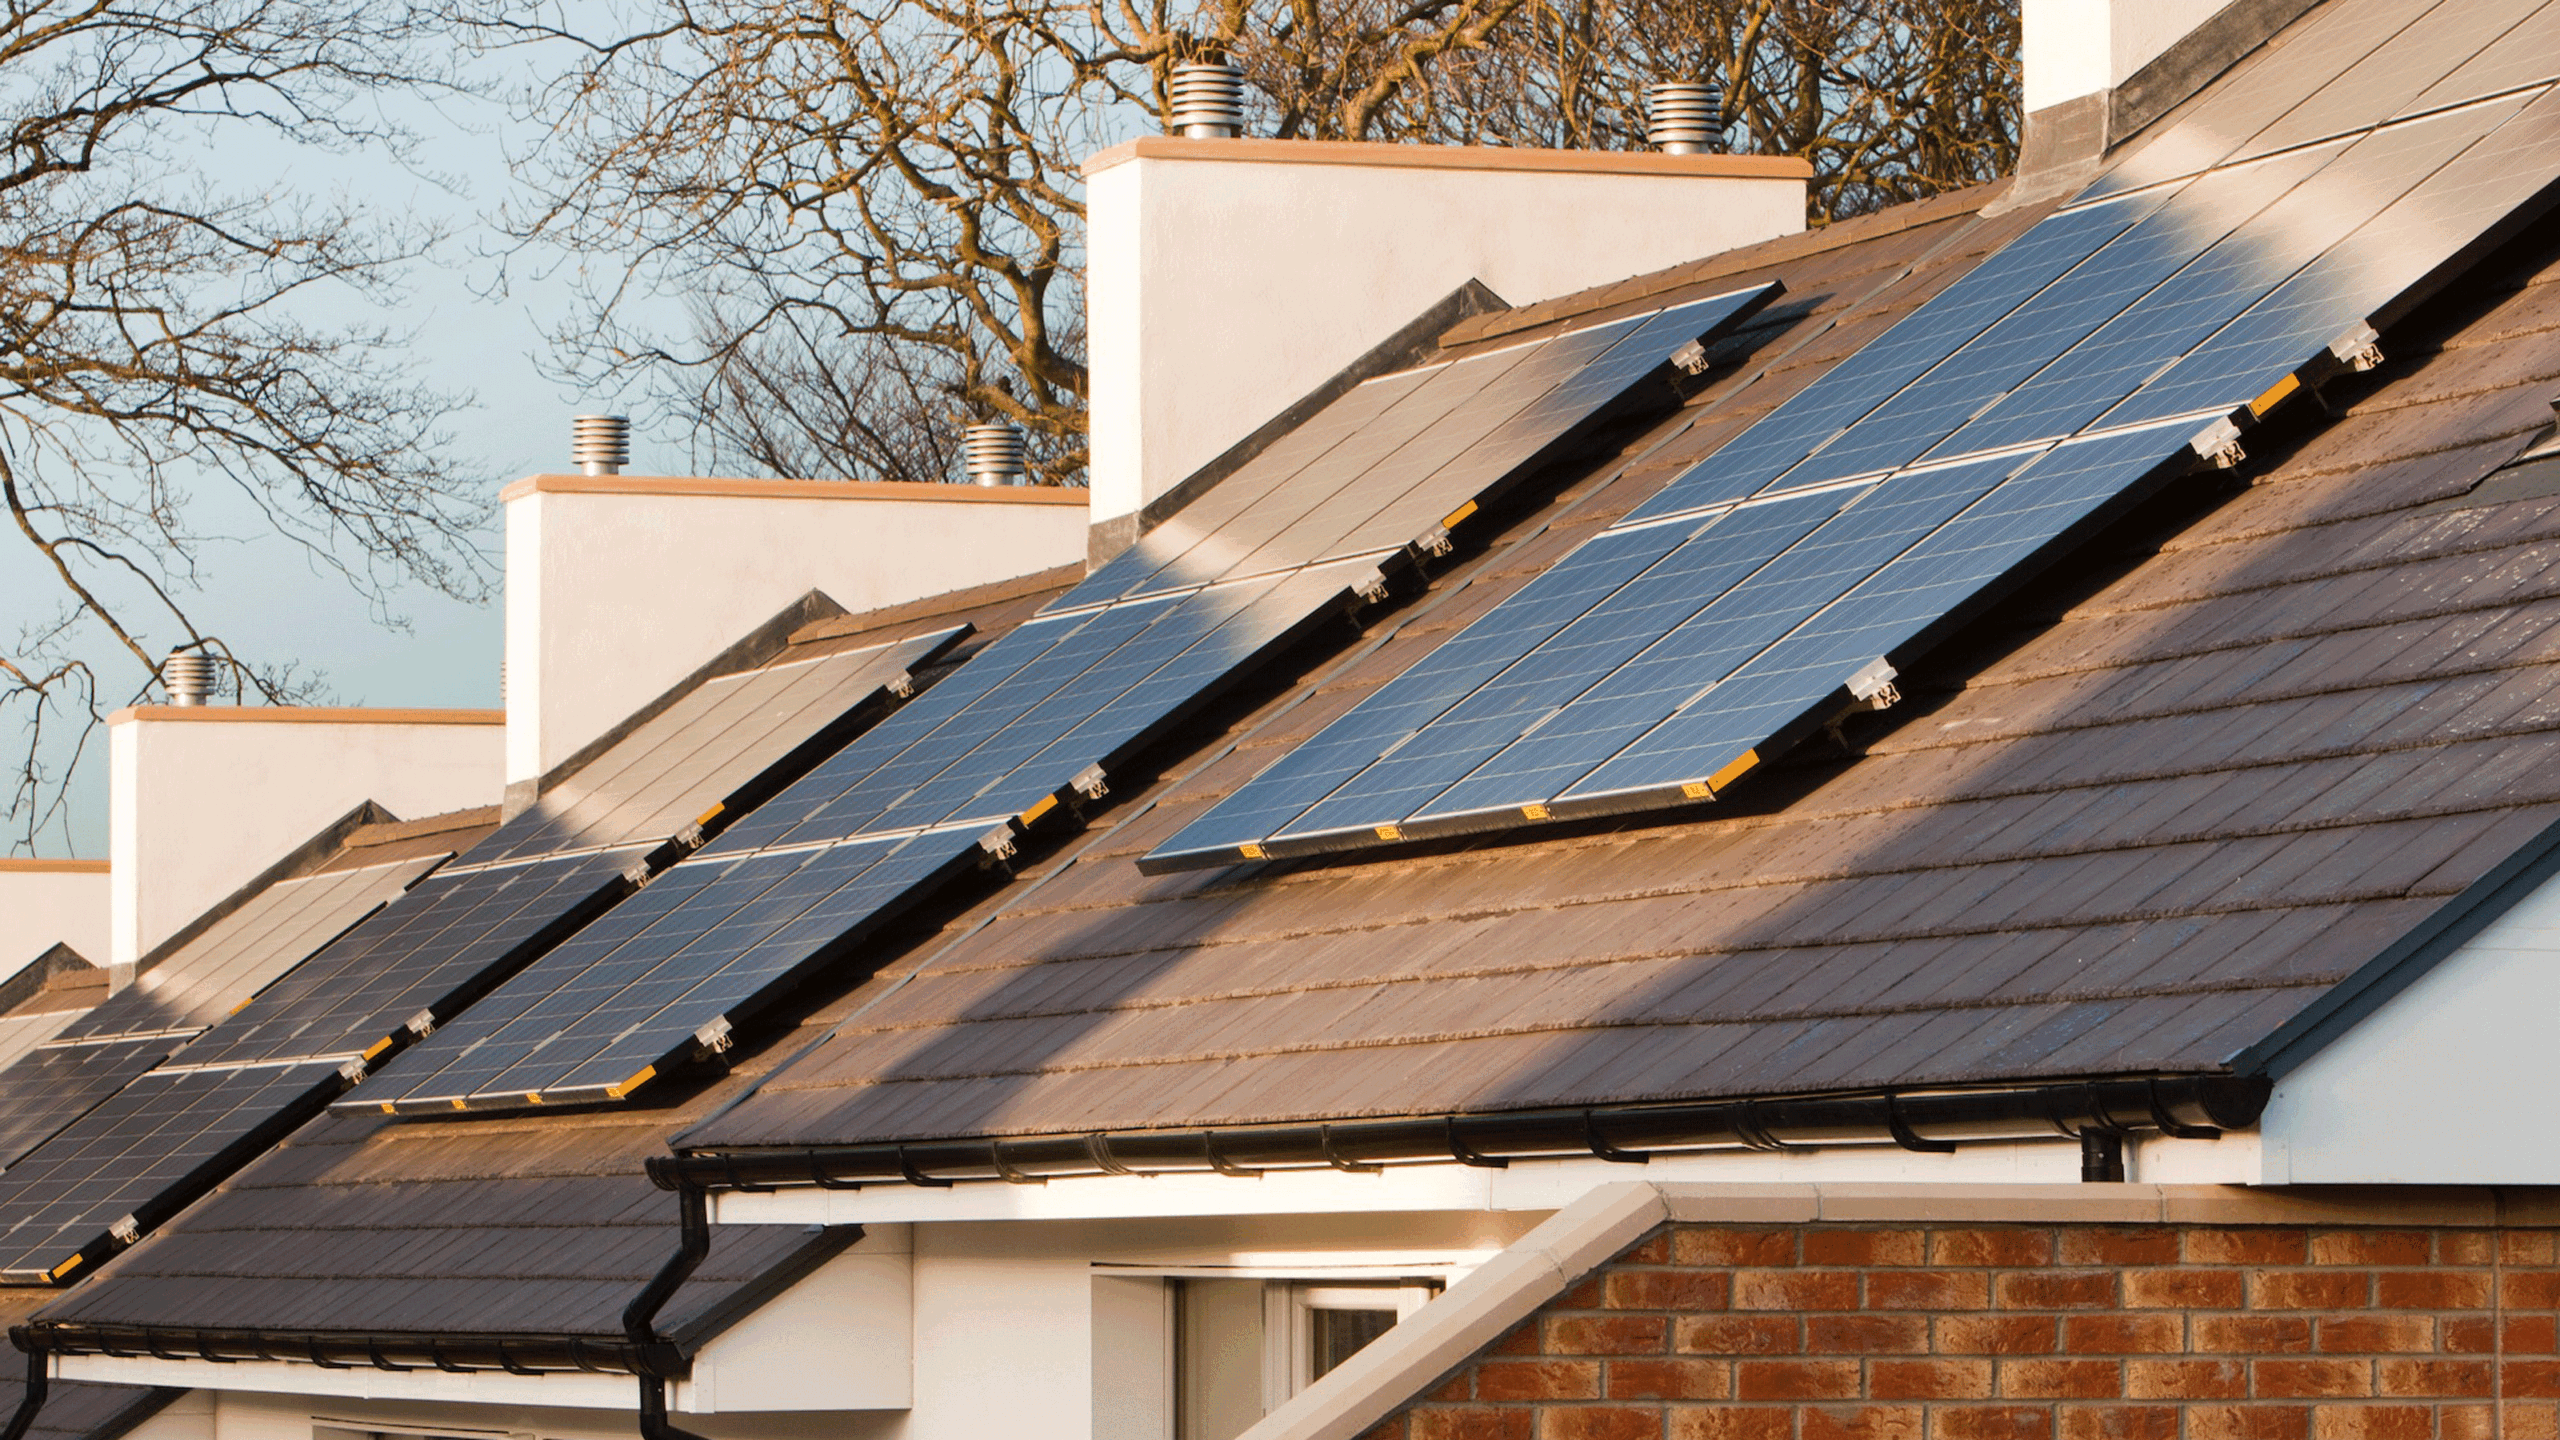 How much do solar panels cost? And are they worth it?